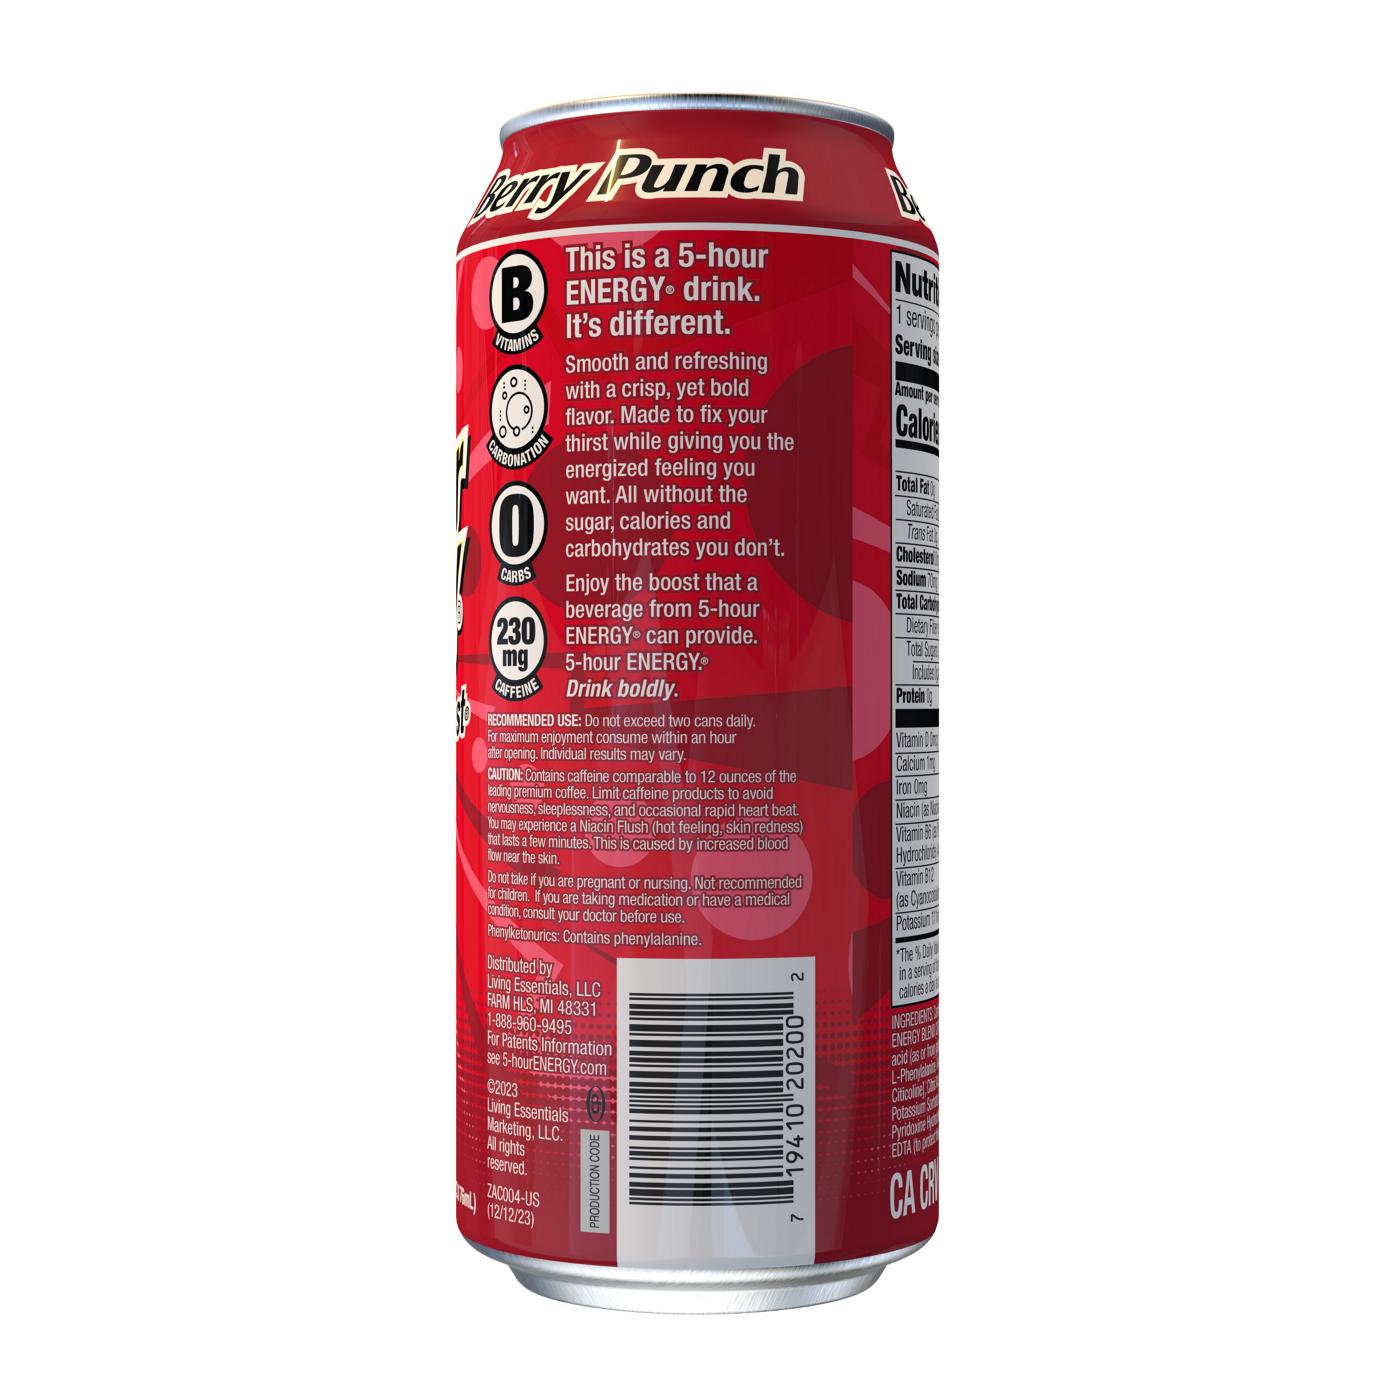 5-hour ENERGY Drink - Berry Punch; image 2 of 3